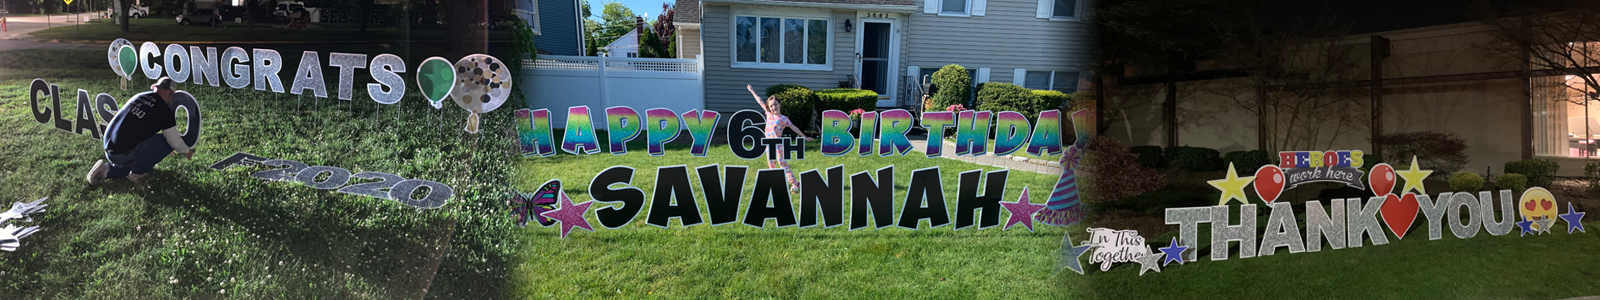 About our company.  Installer, Savannah 6th birthday and Thank you to heroes